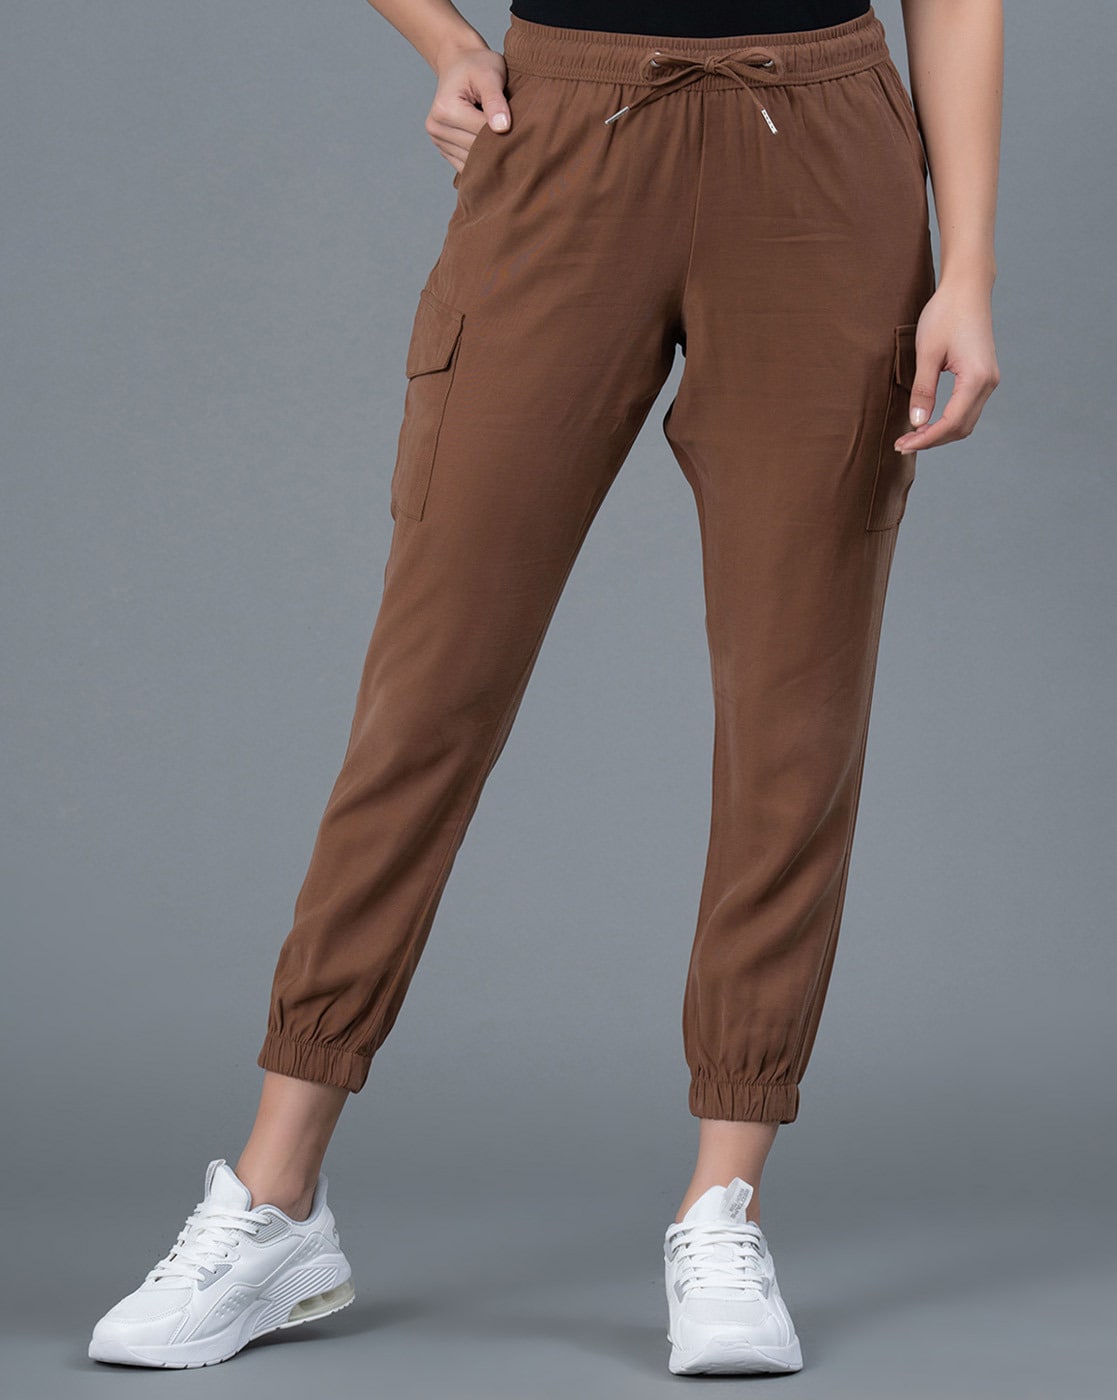 Buy Off White Trousers & Pants for Men by RED TAPE Online | Ajio.com